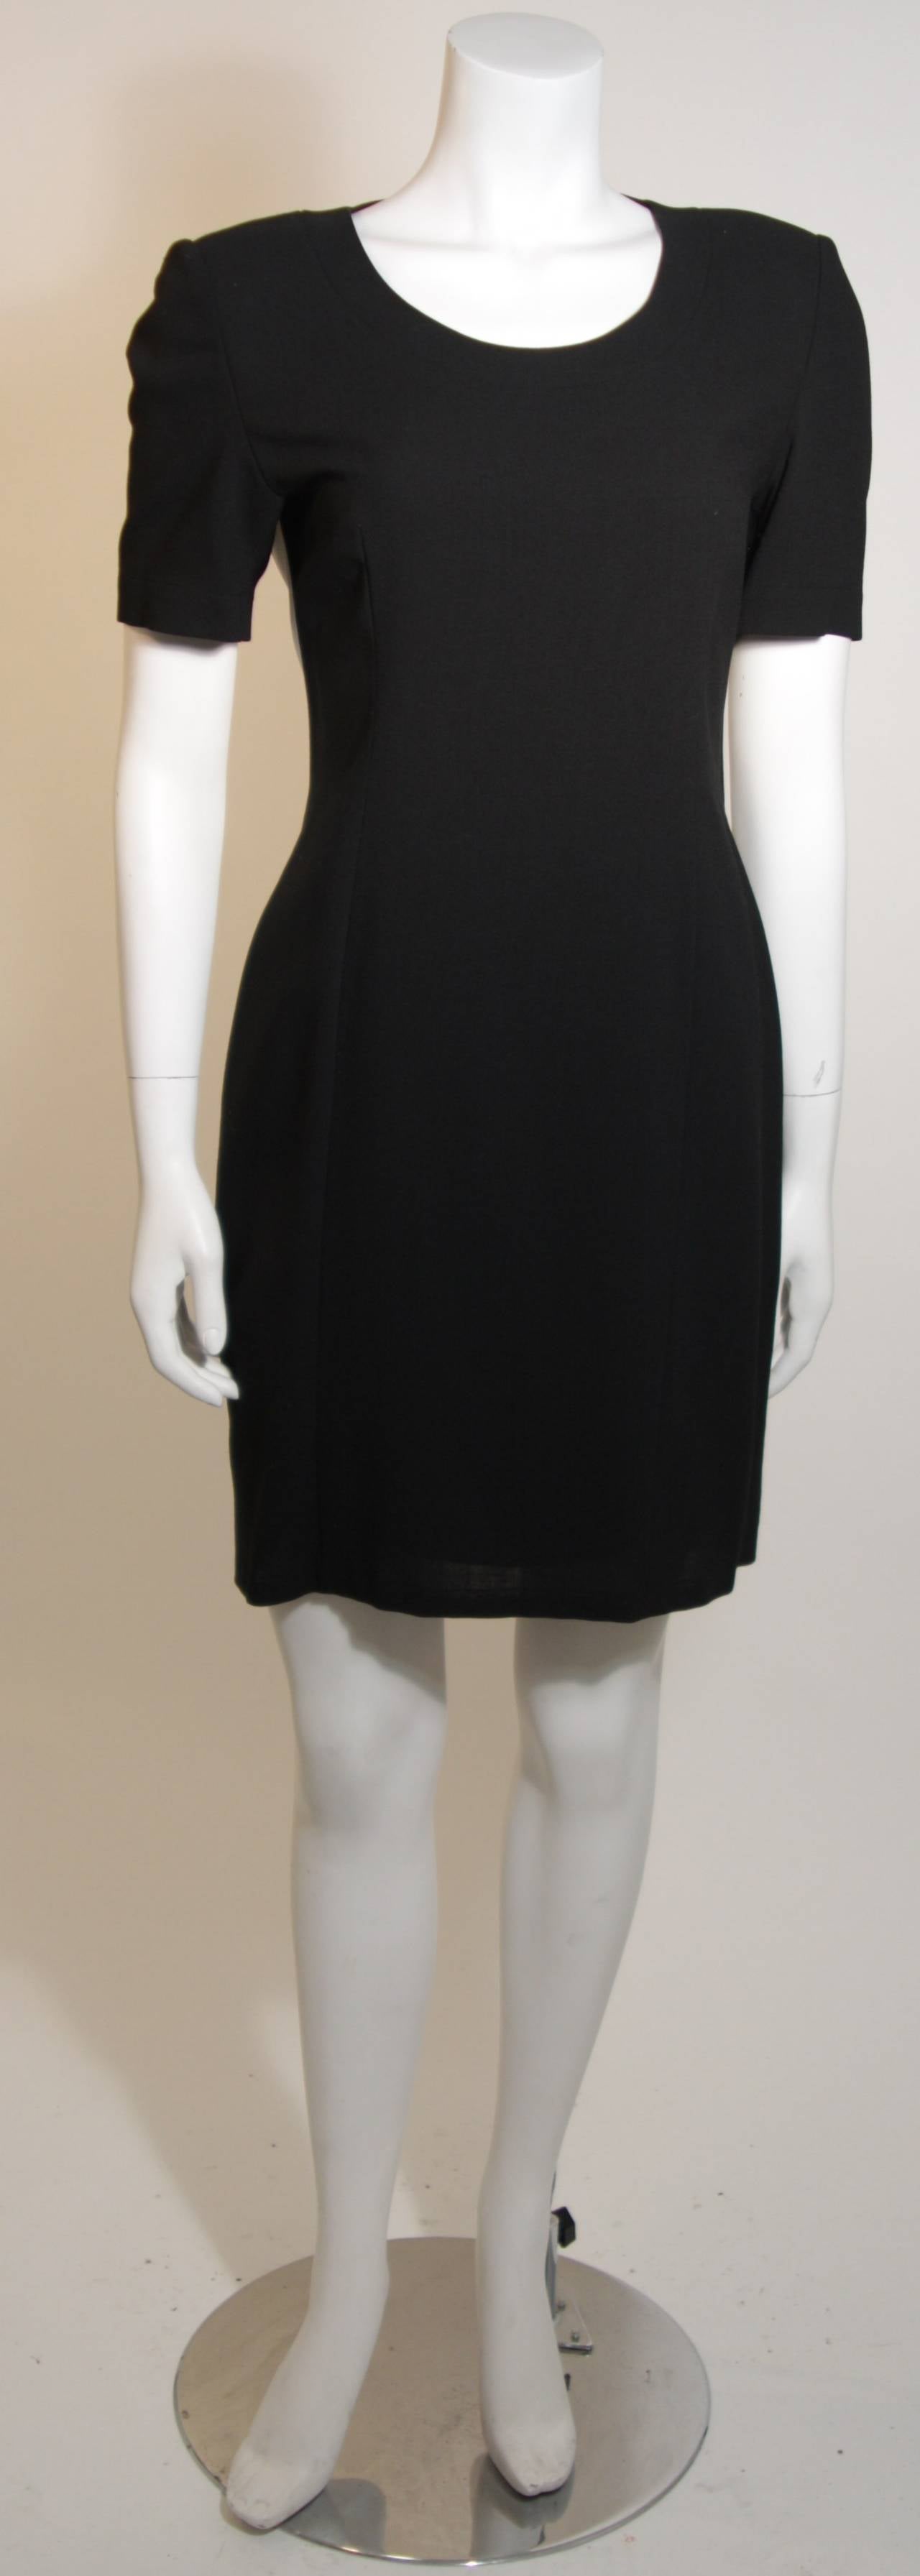 This Gianfranco Ferre dress features a side zipper. The black and white back is complimented by a embossed leather suspender detail. Made in Italy. 

Measures (Approximately)
Size 40 
Length: 35.5